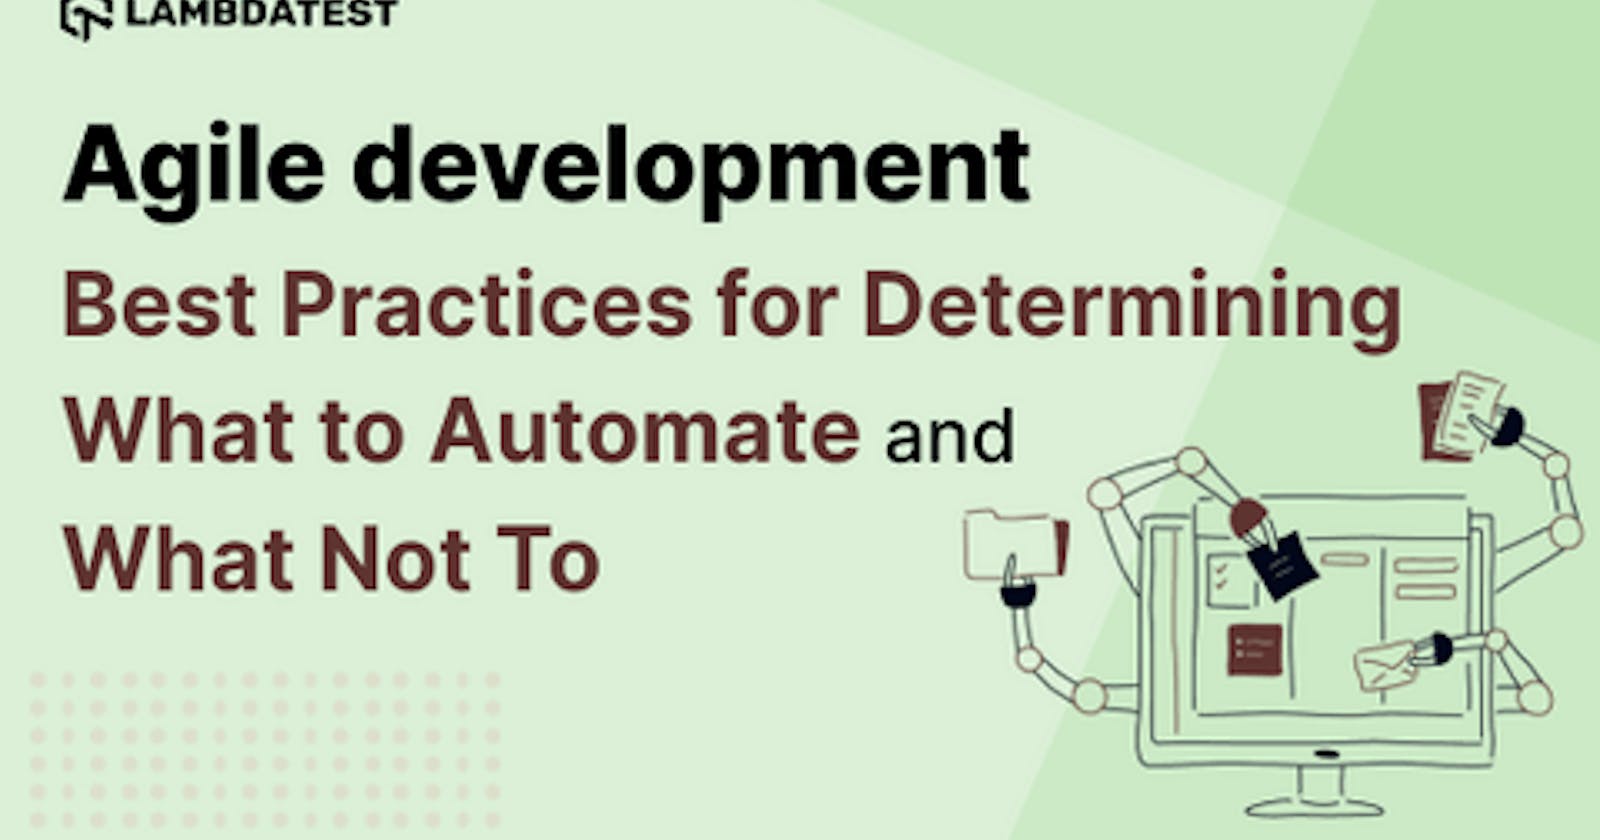 Agile Development Best Practices for Determining What to Automate